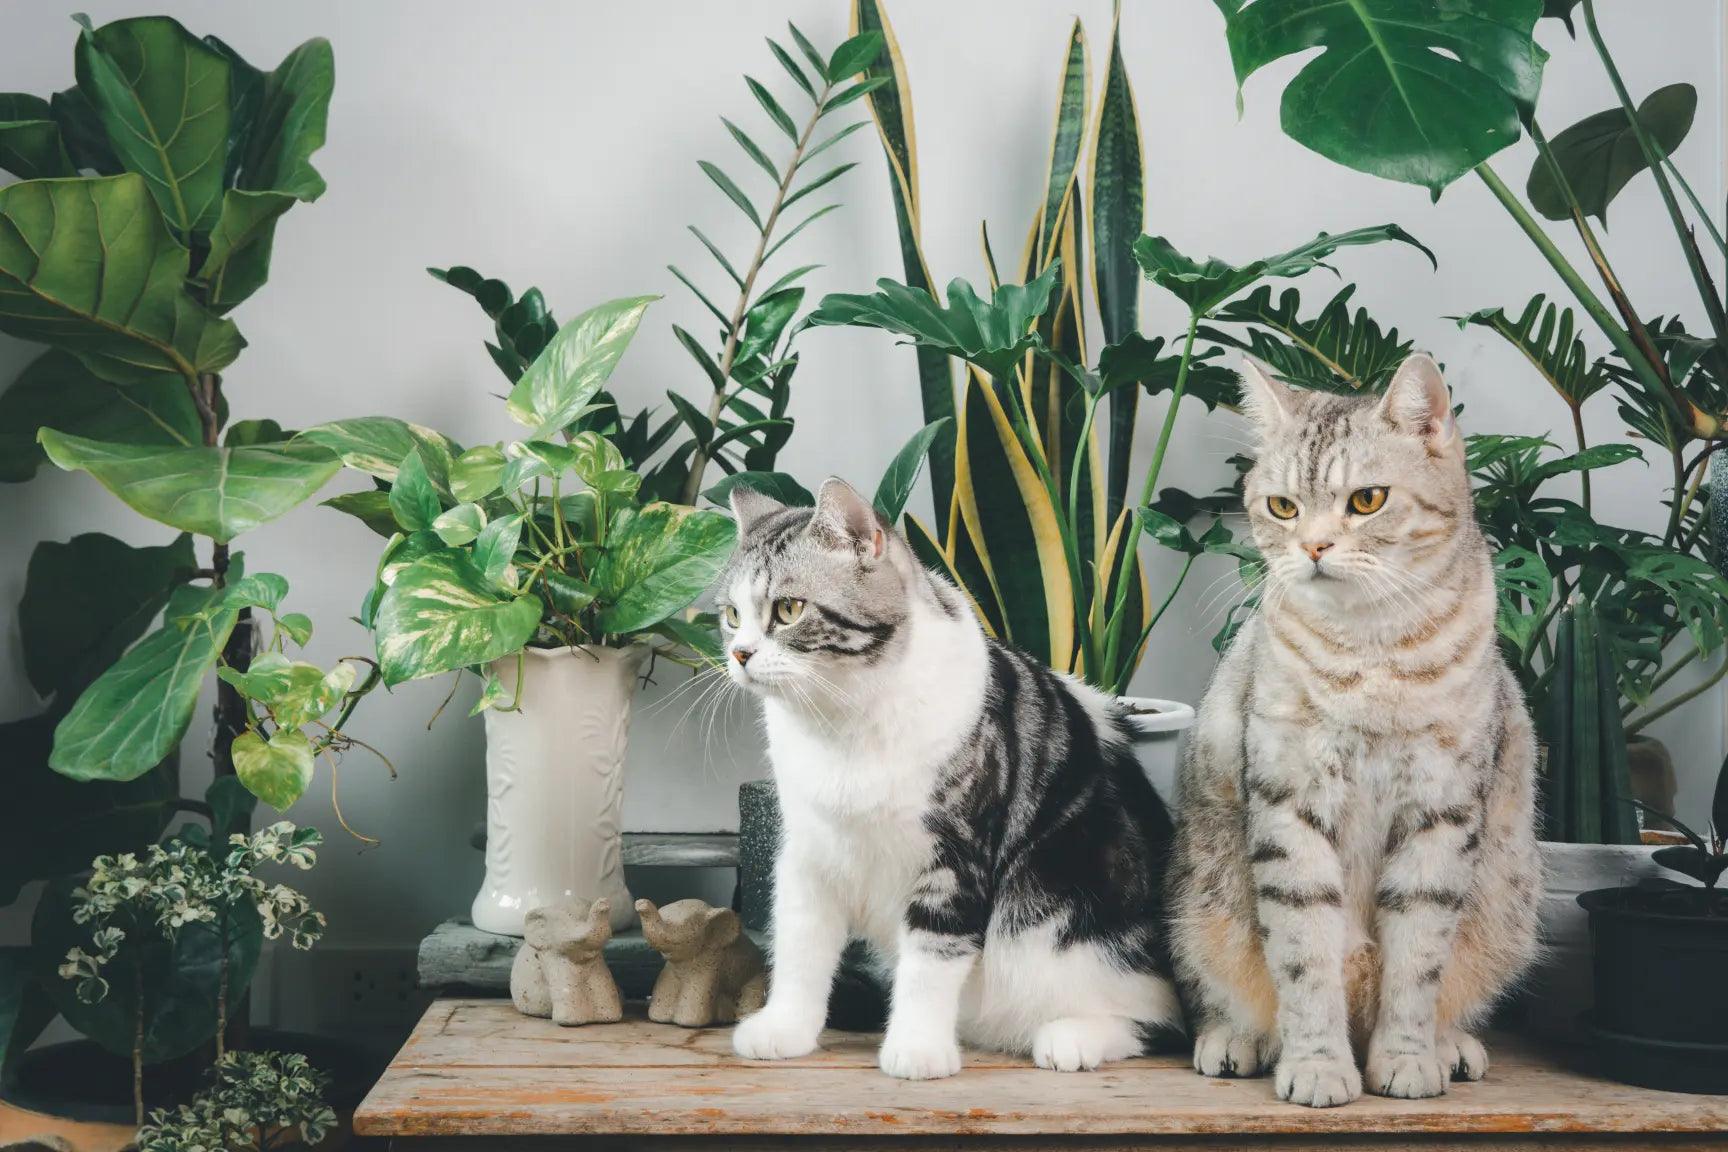 What Indoor Plants Are Safe for Cats?